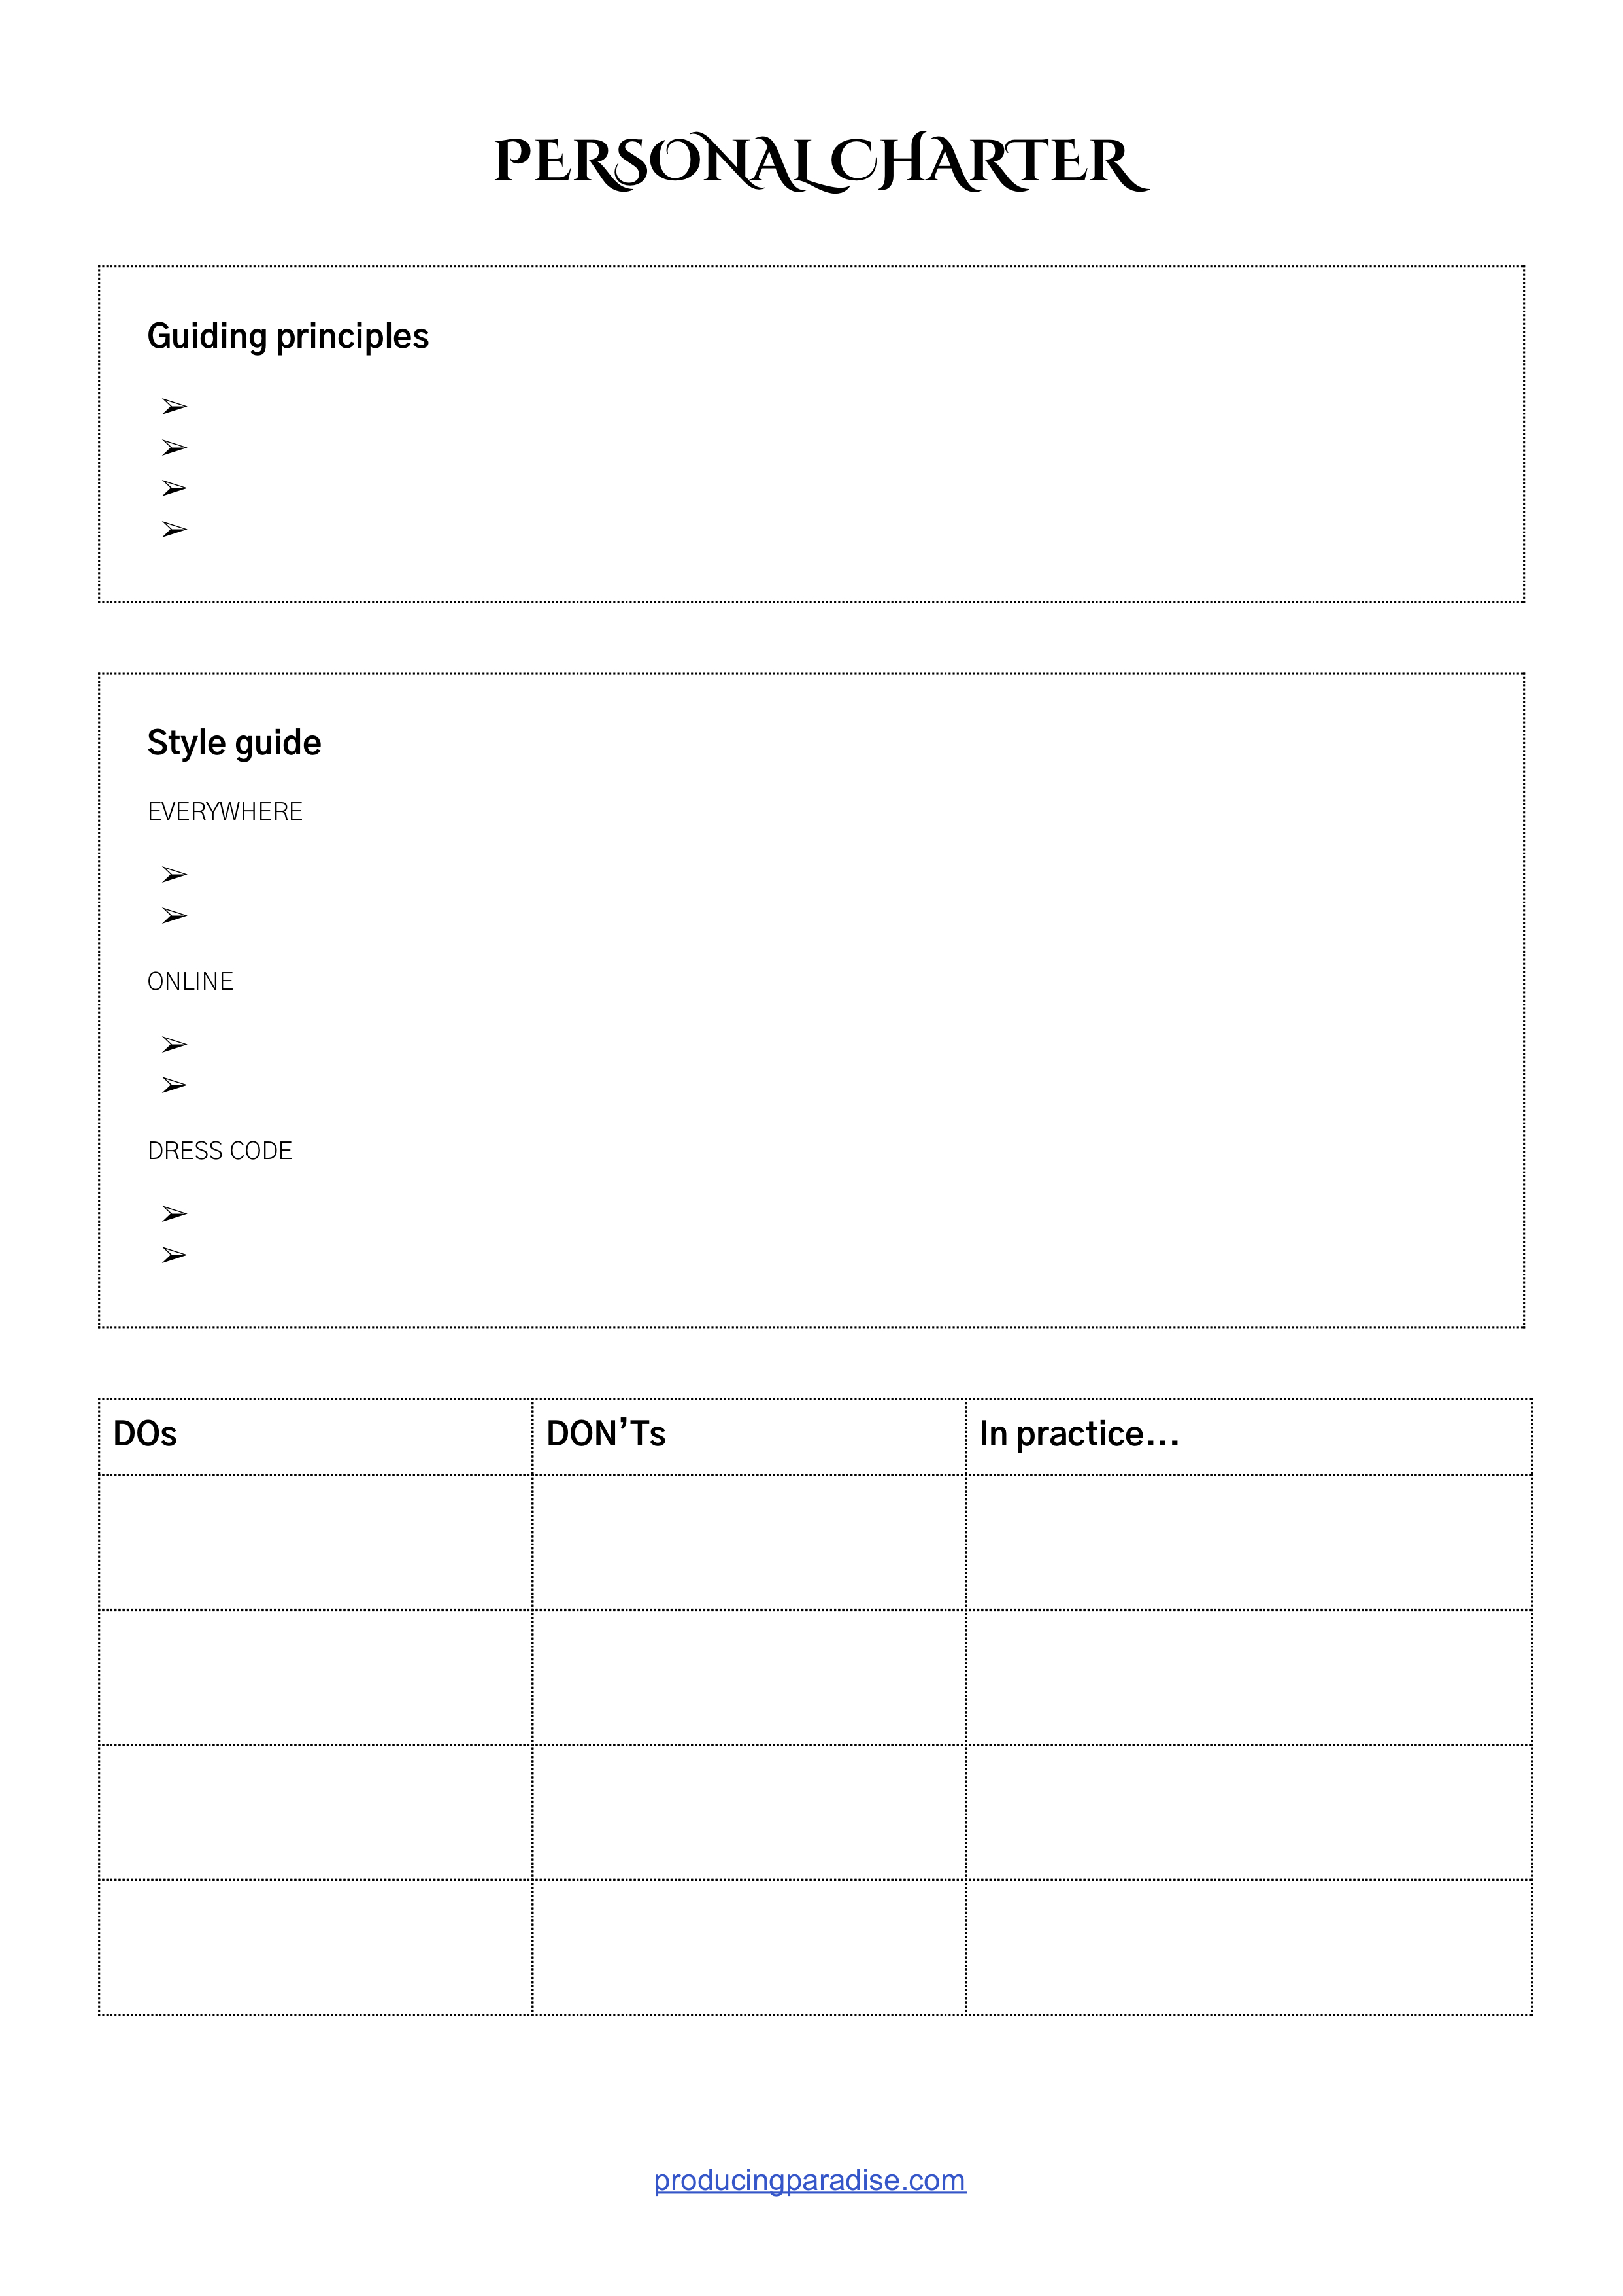 Screenshot of a document titled 'Personal Charter' with blank sections ready to fill out for guiding principles, style guide, and Dos and Don'ts